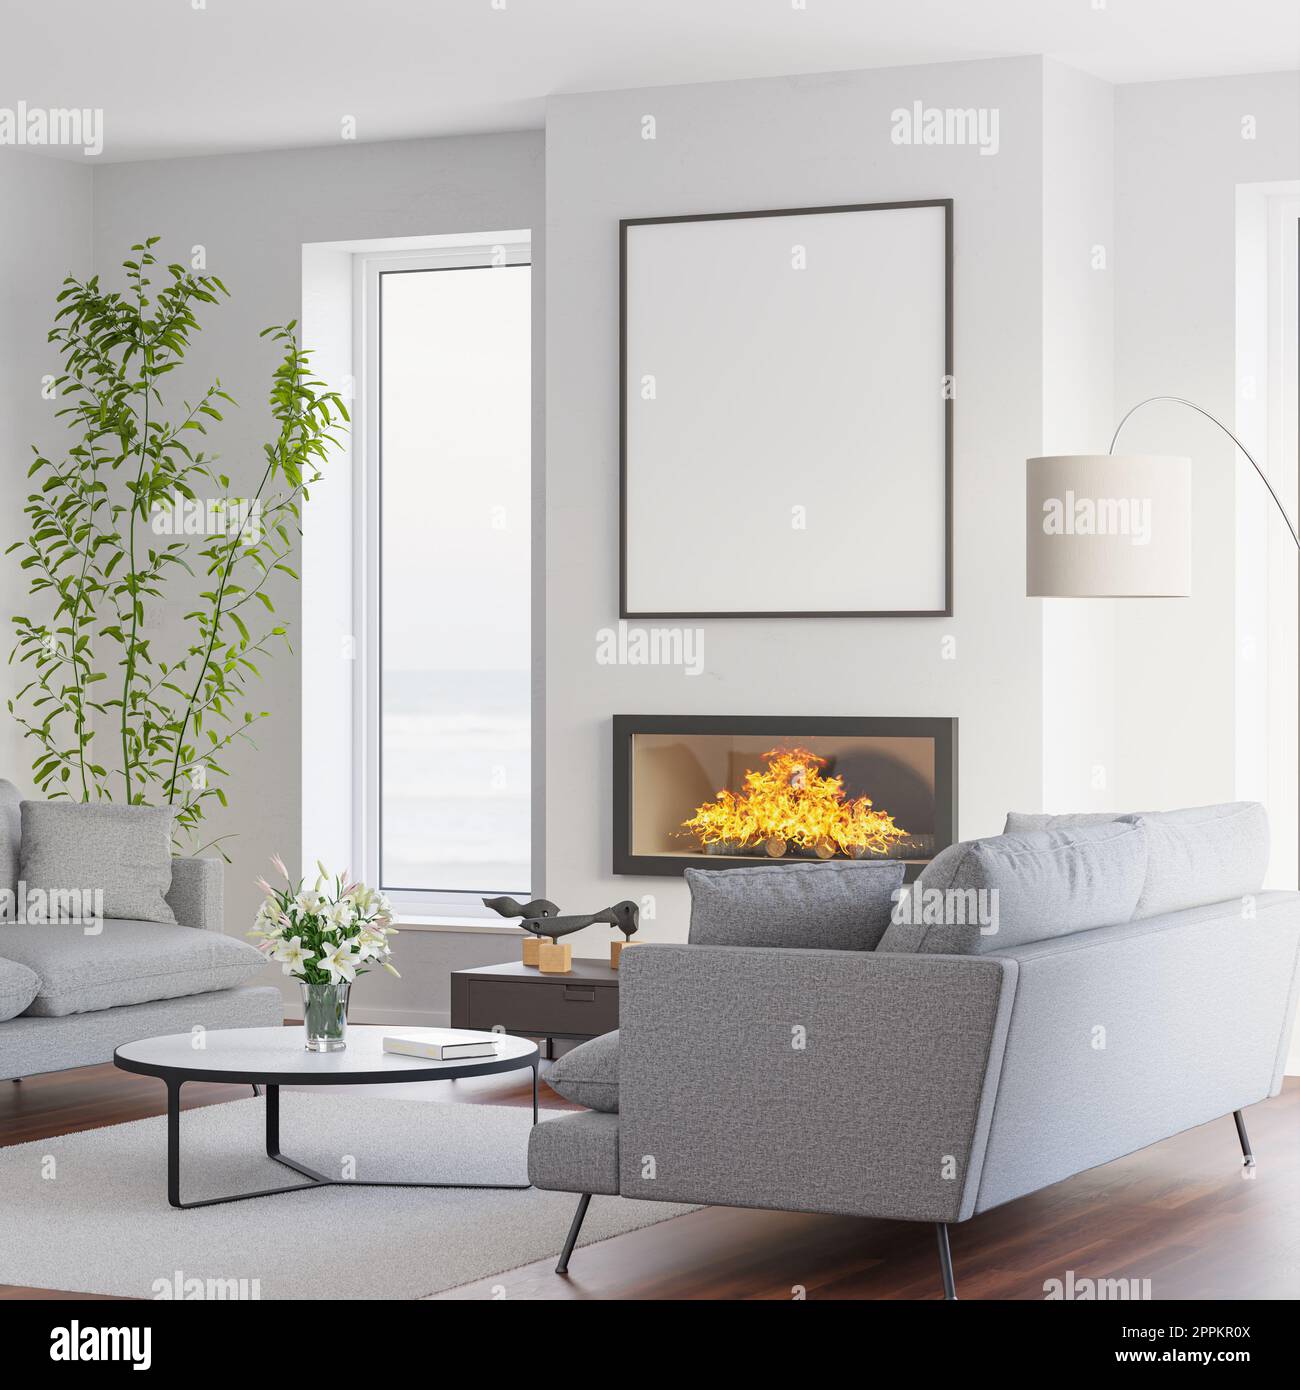 Model apartment at the sea. Sofas, Lilies in vase, fireplace with fire, mockup picture frame, windows to the sea. Stock Photo